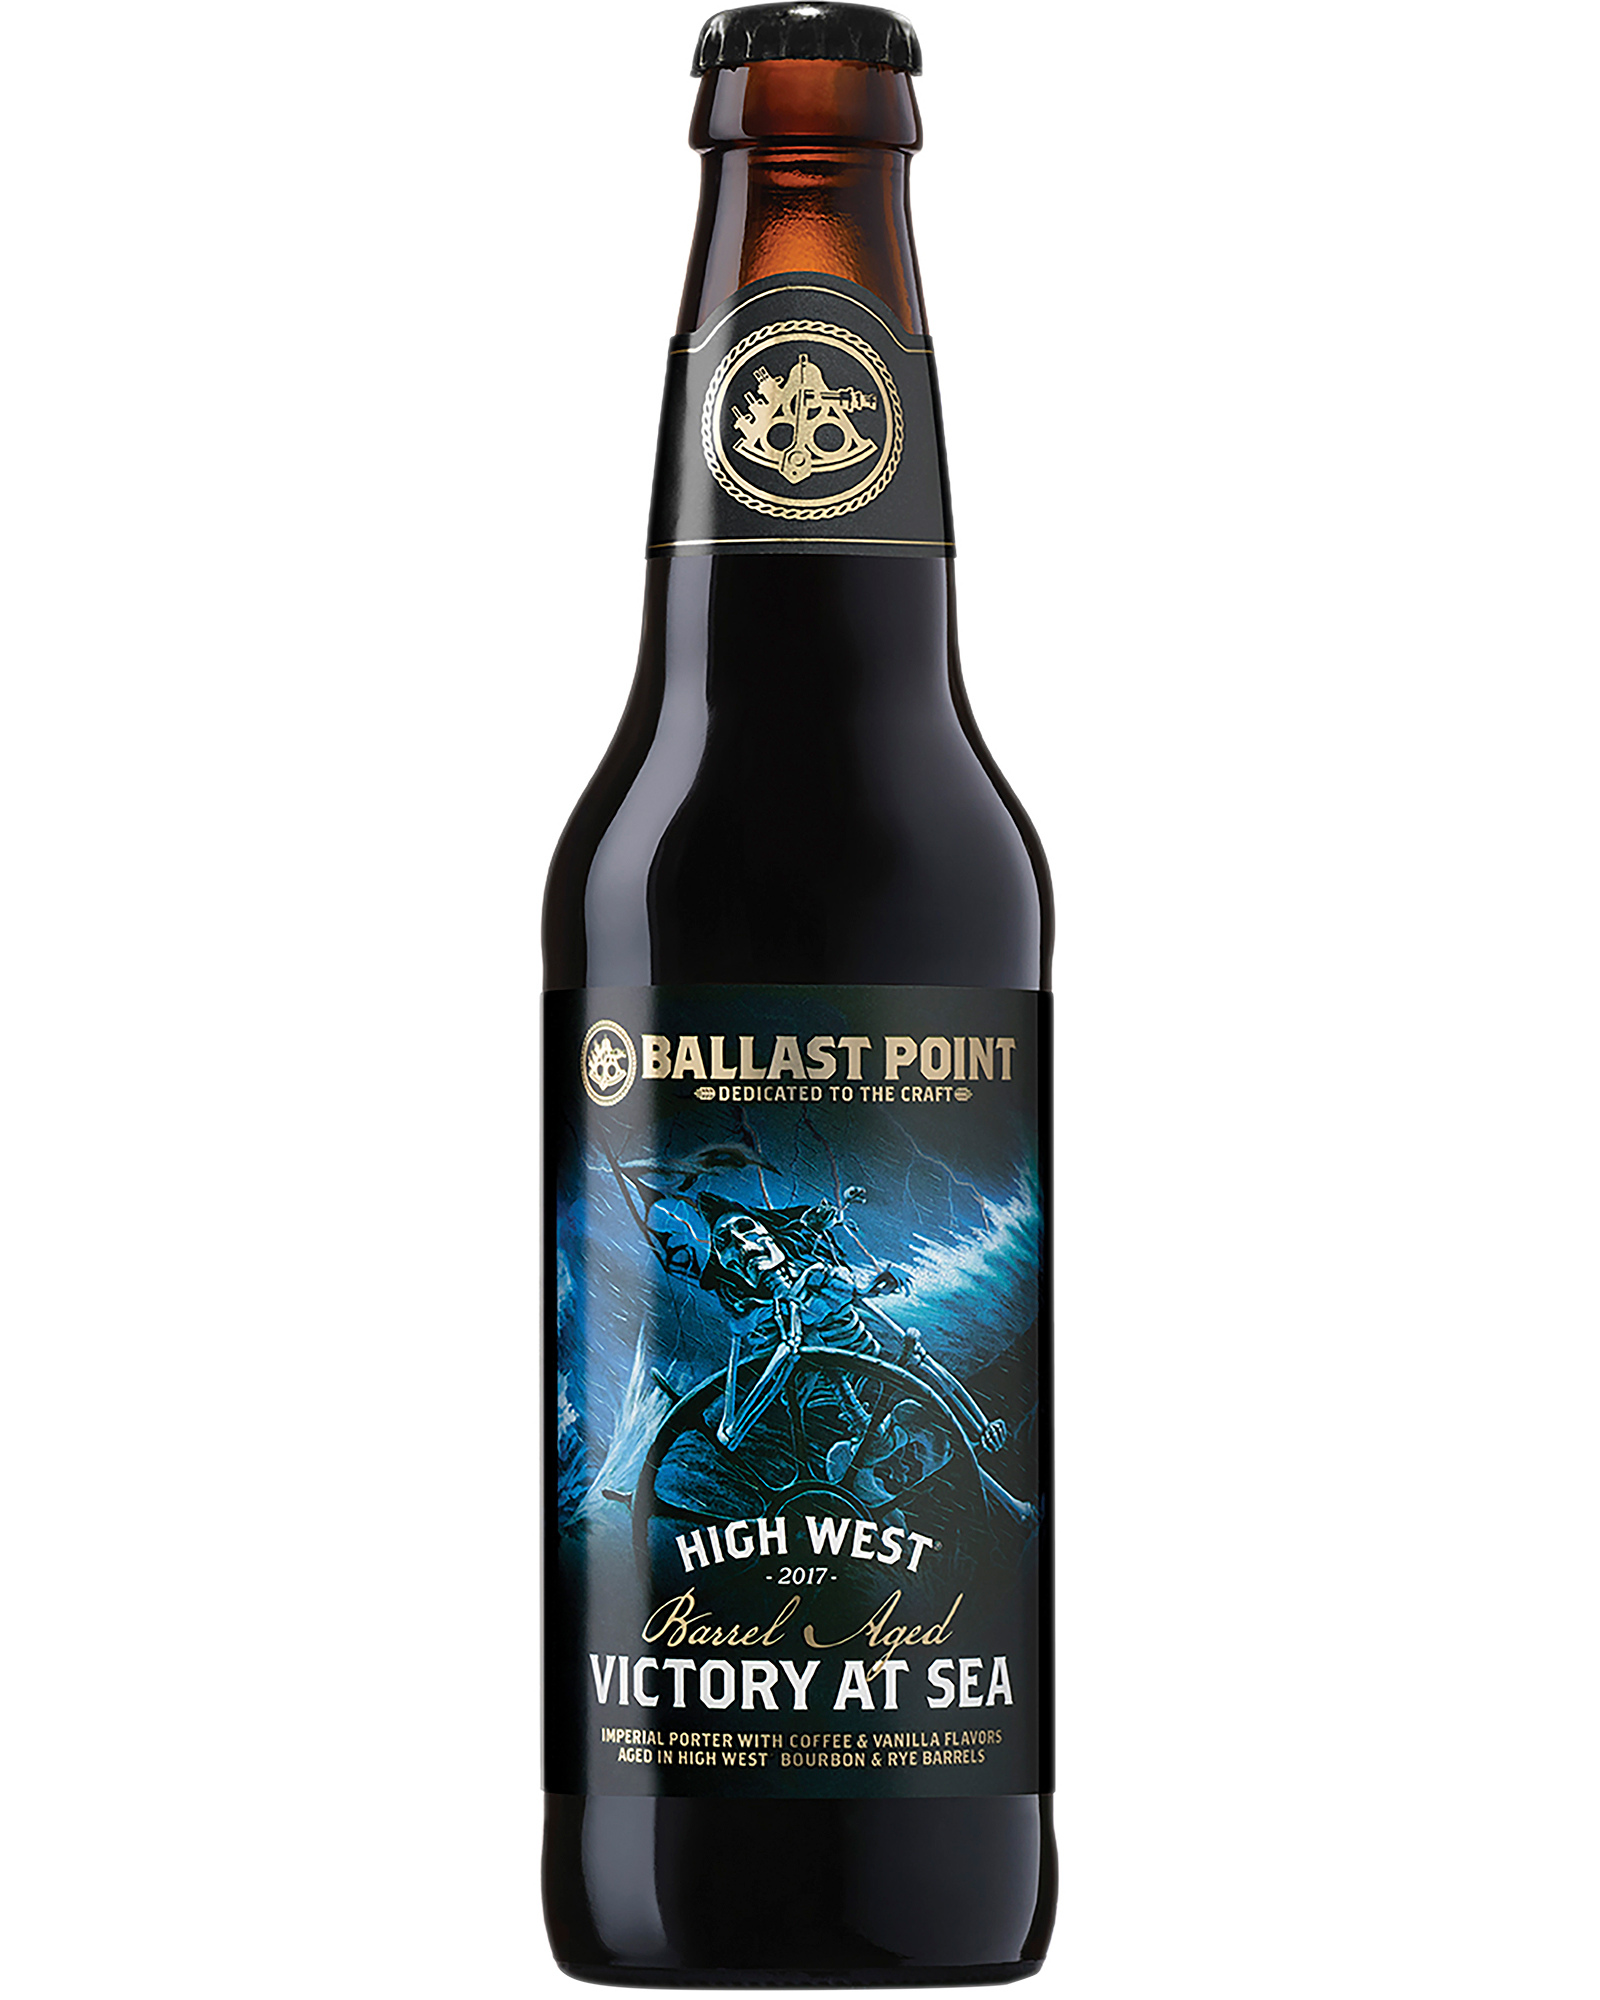 Ballast Point Brewing Ballast Point High West Barrel Aged Victory At Sea 2018